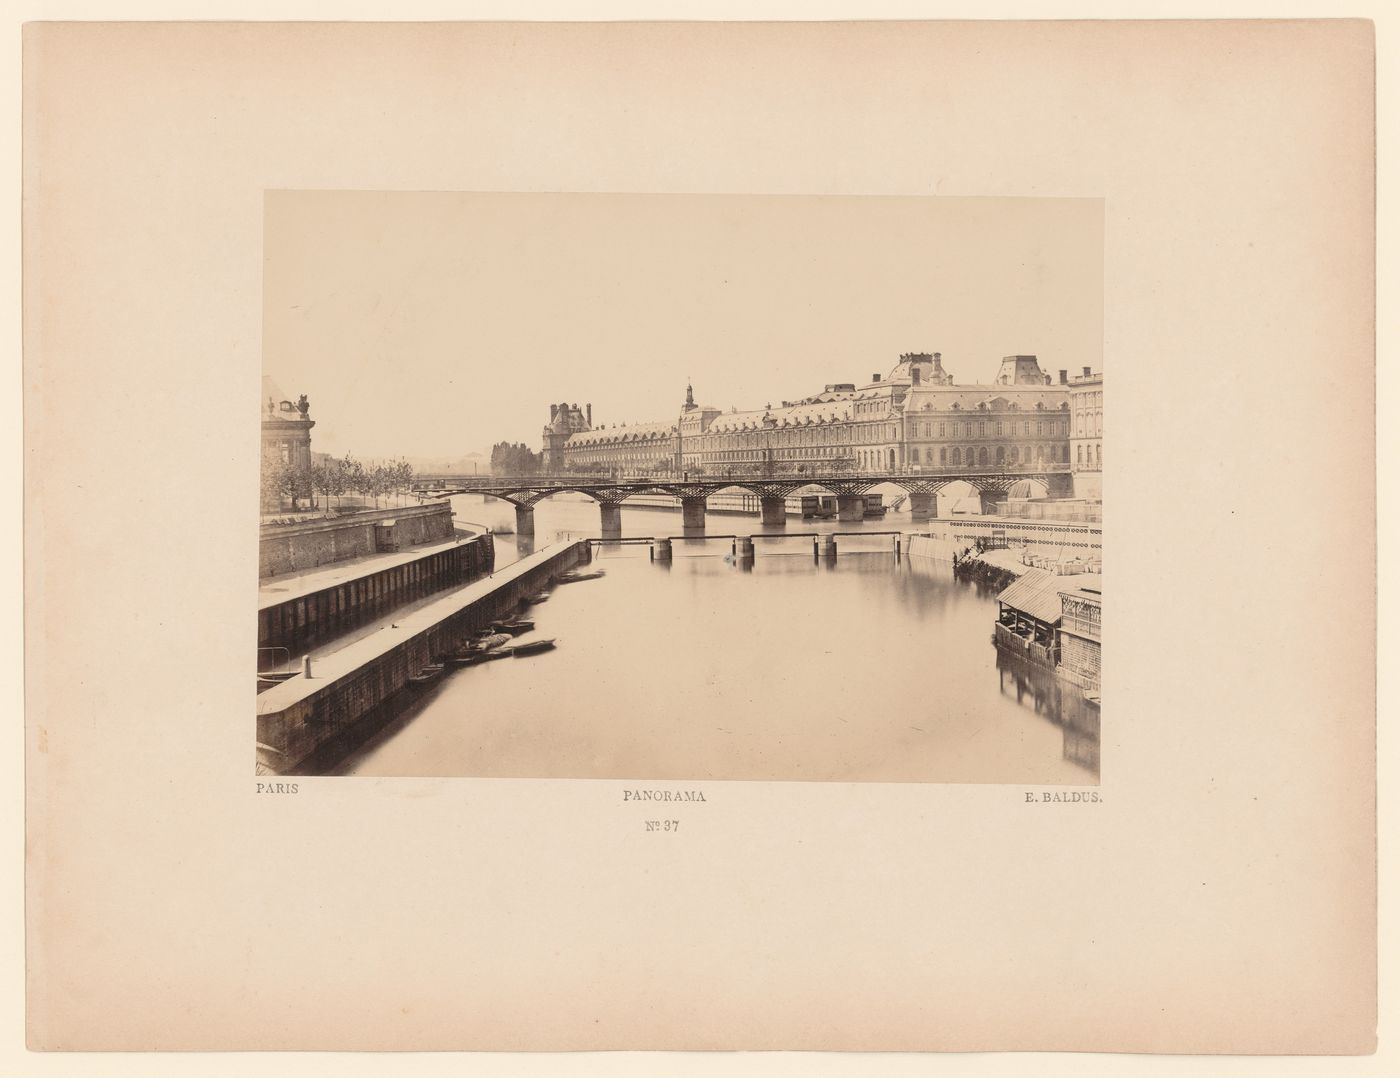 View of the Seine and the Louvre, with bridge in middle distance, Paris, France